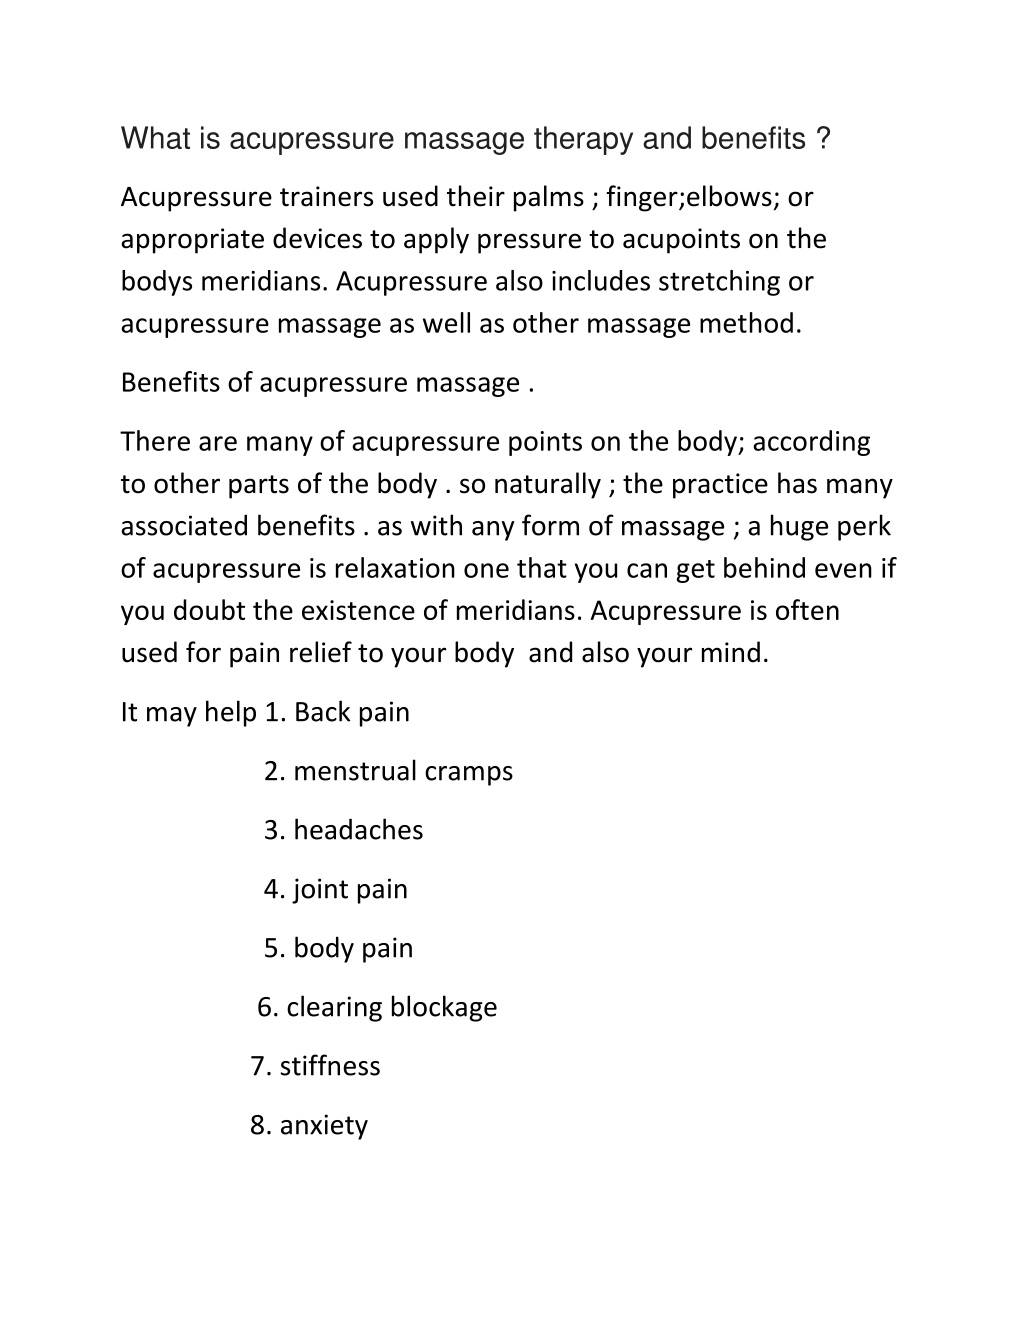 Ppt What Is Acupressure Massage Therapy Benefits Powerpoint Presentation Id11480443